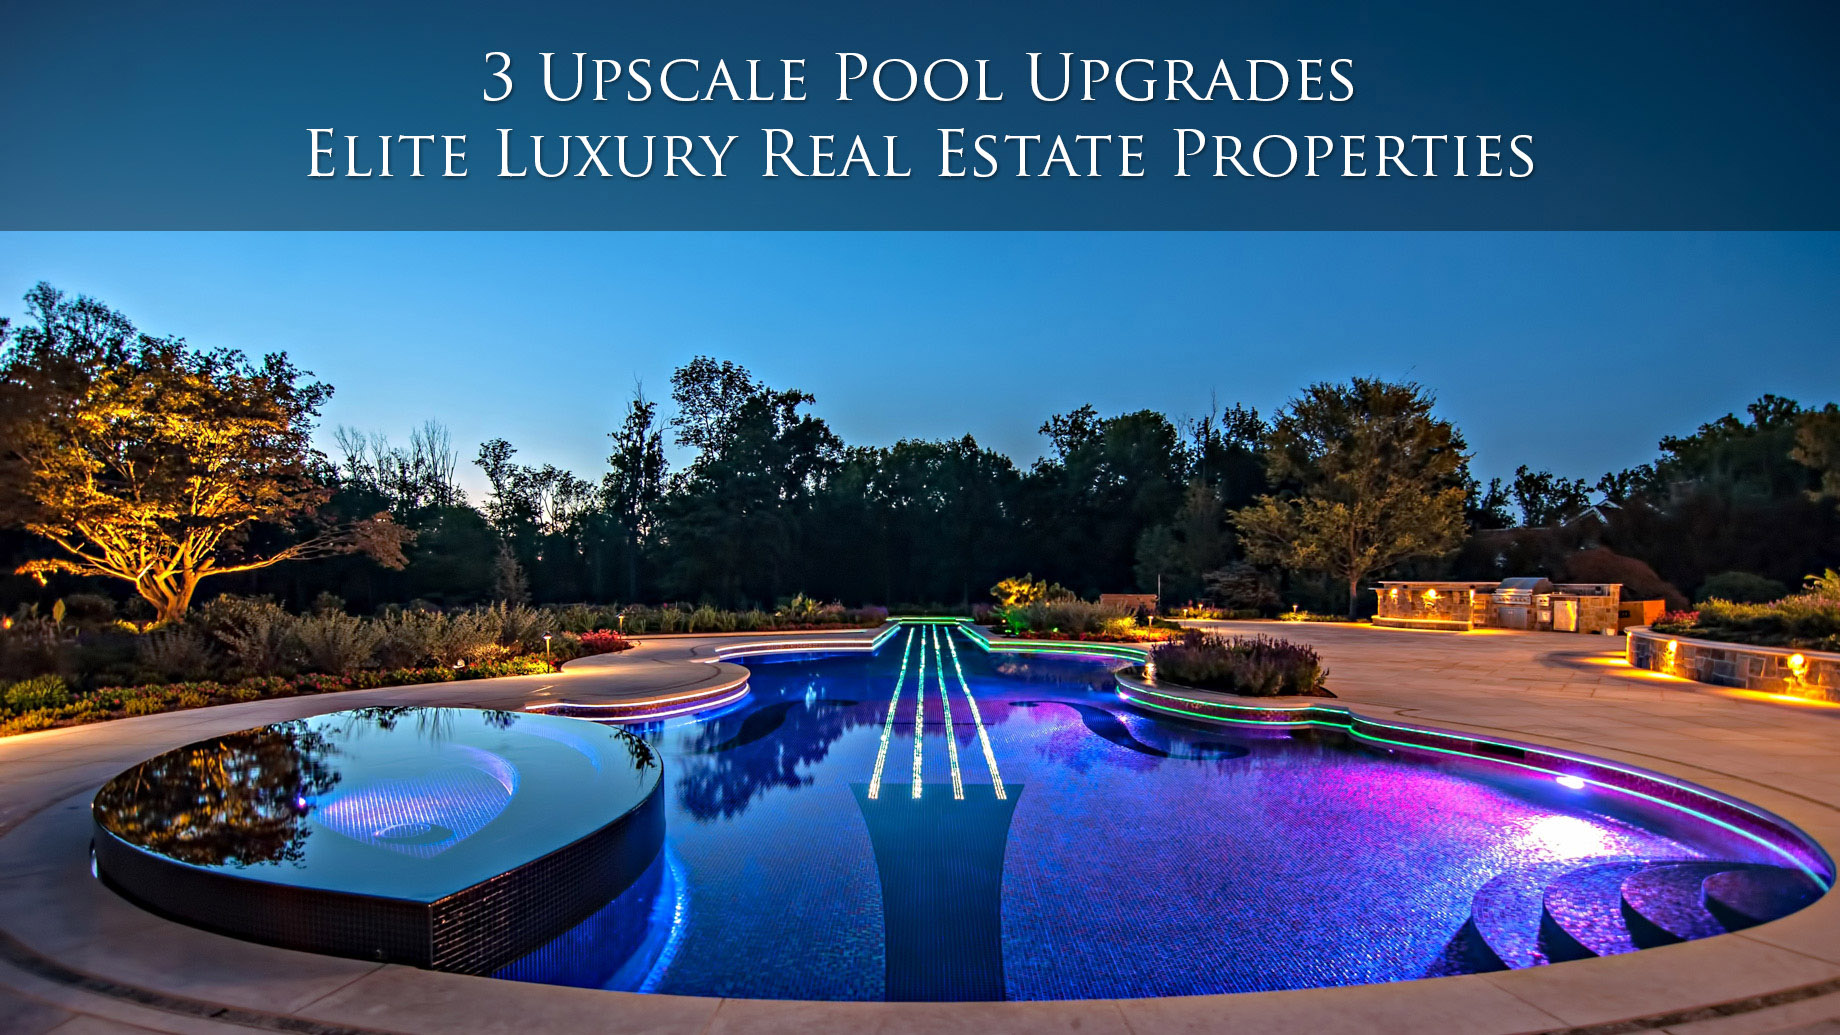 3 Upscale Pool Upgrades for Elite Luxury Real Estate Properties